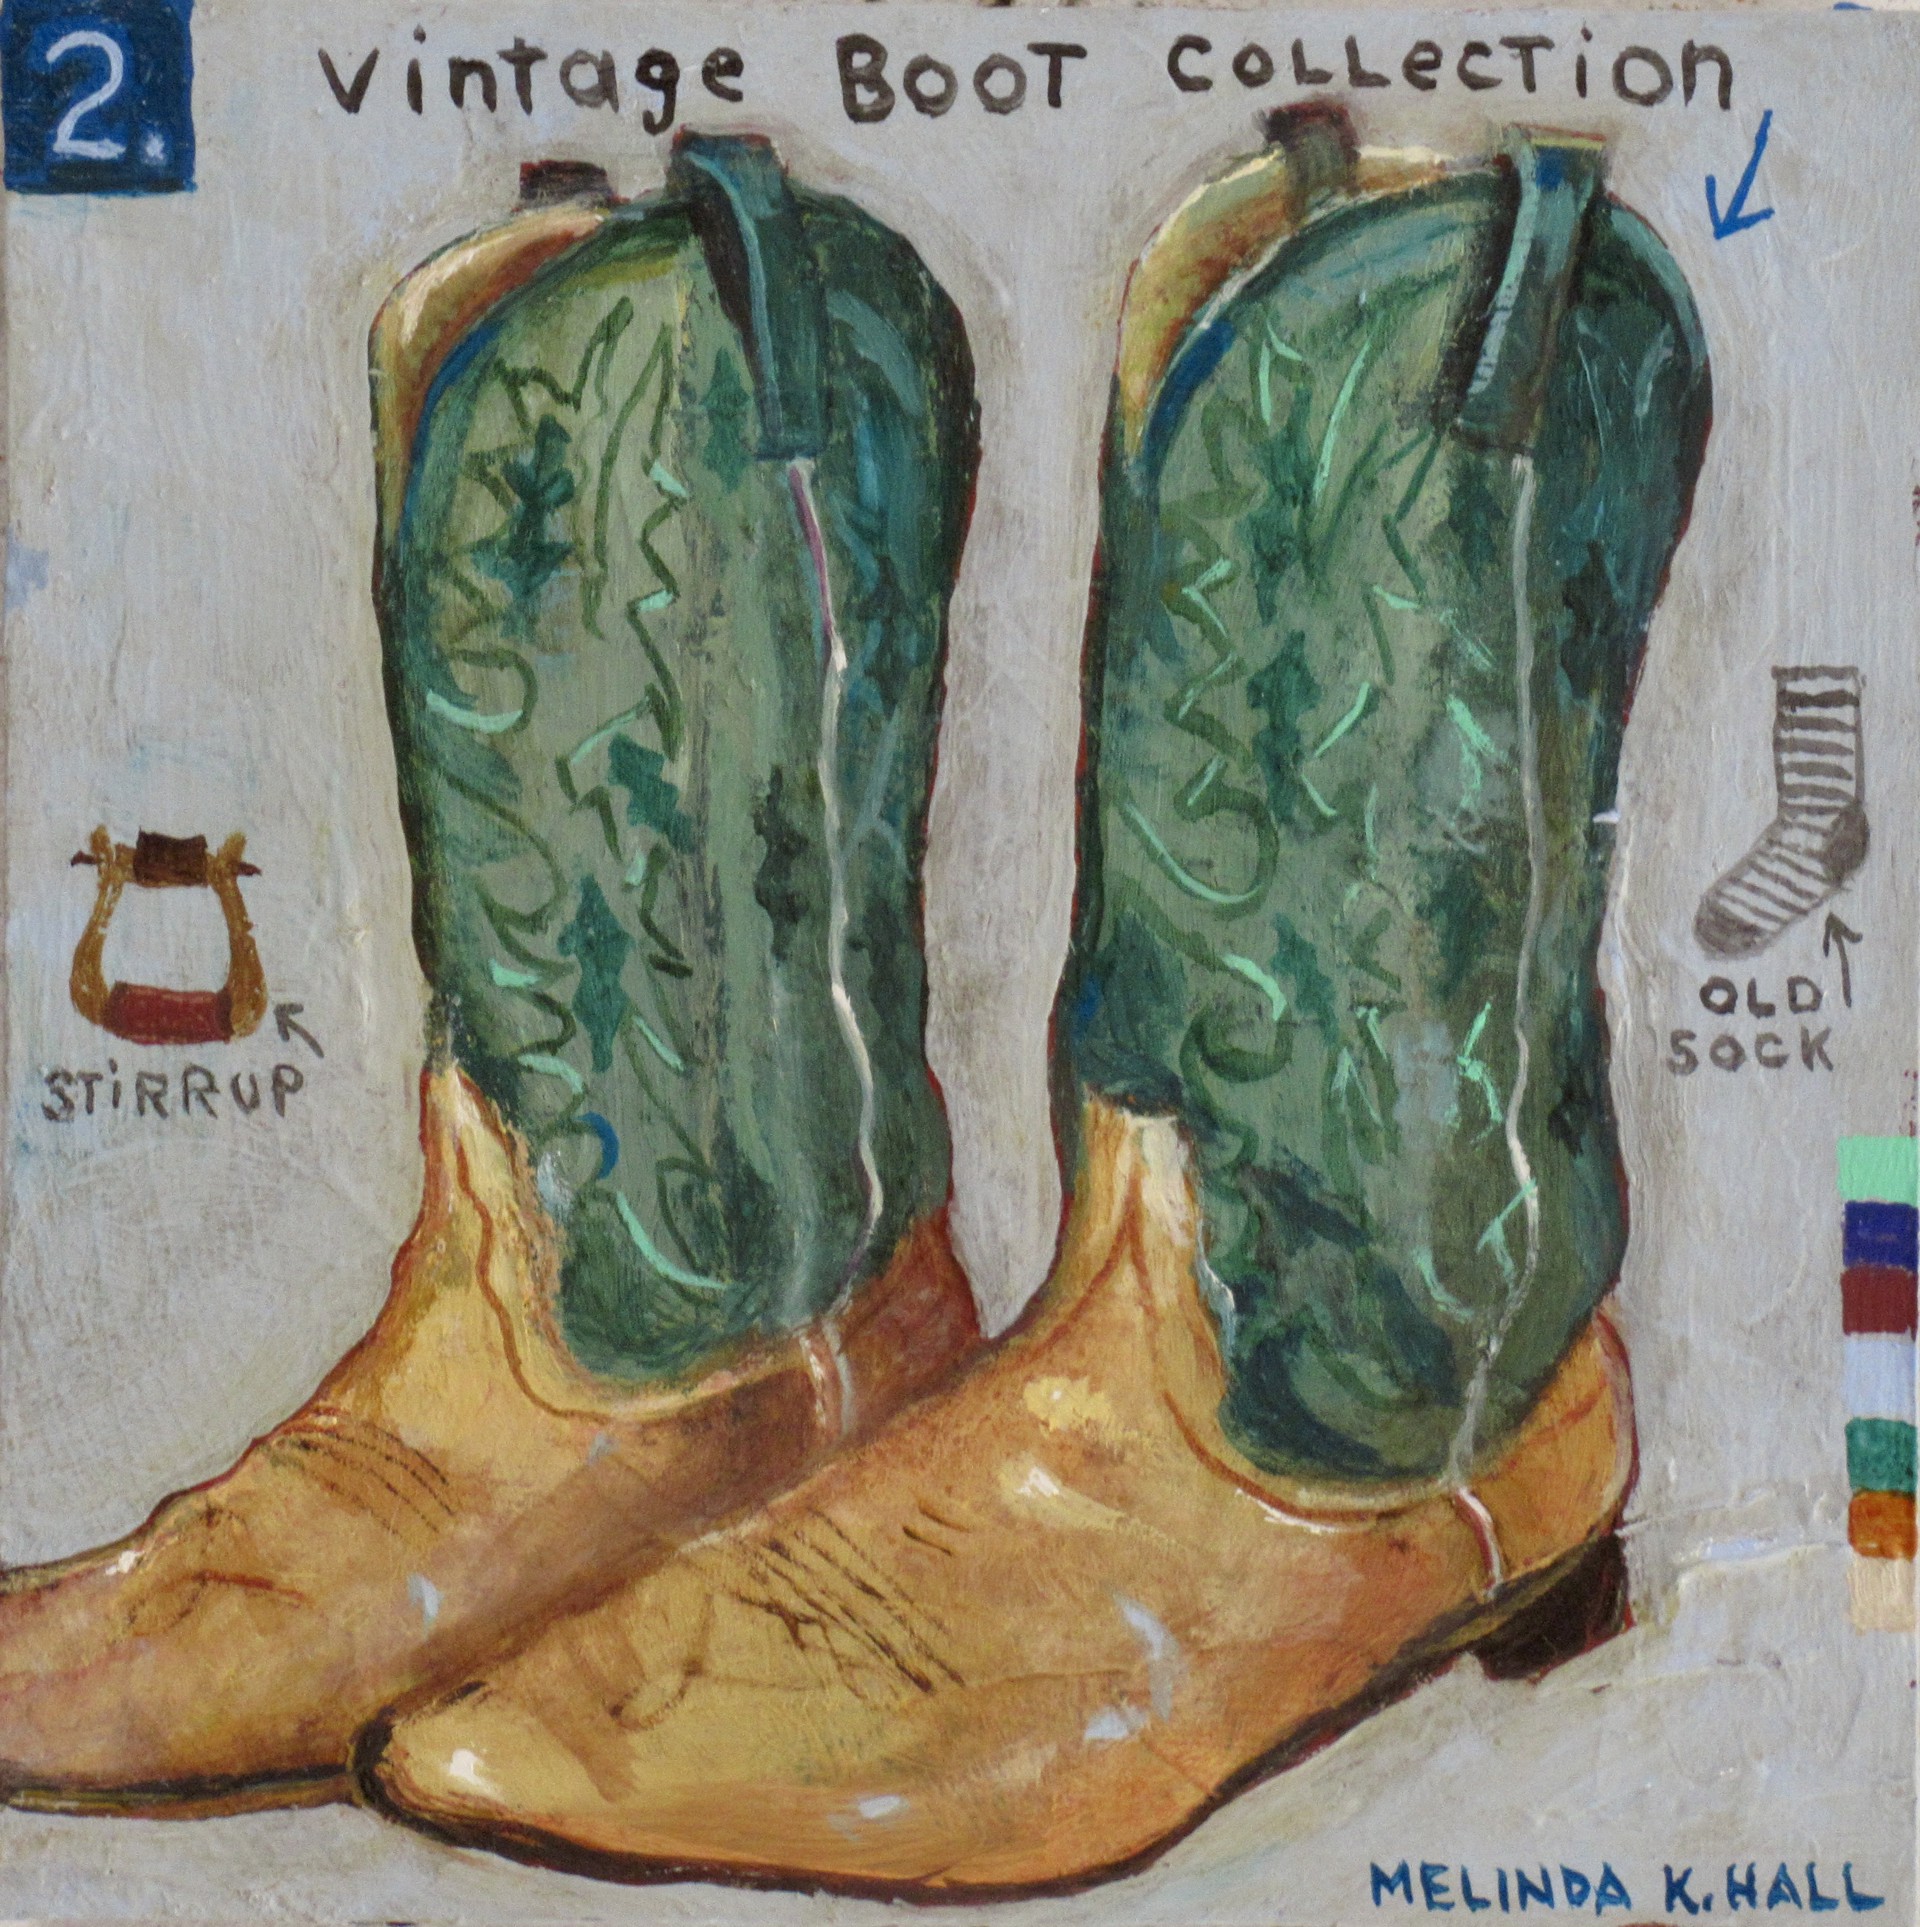 Vintage Boot Collection #2 by Melinda K. Hall